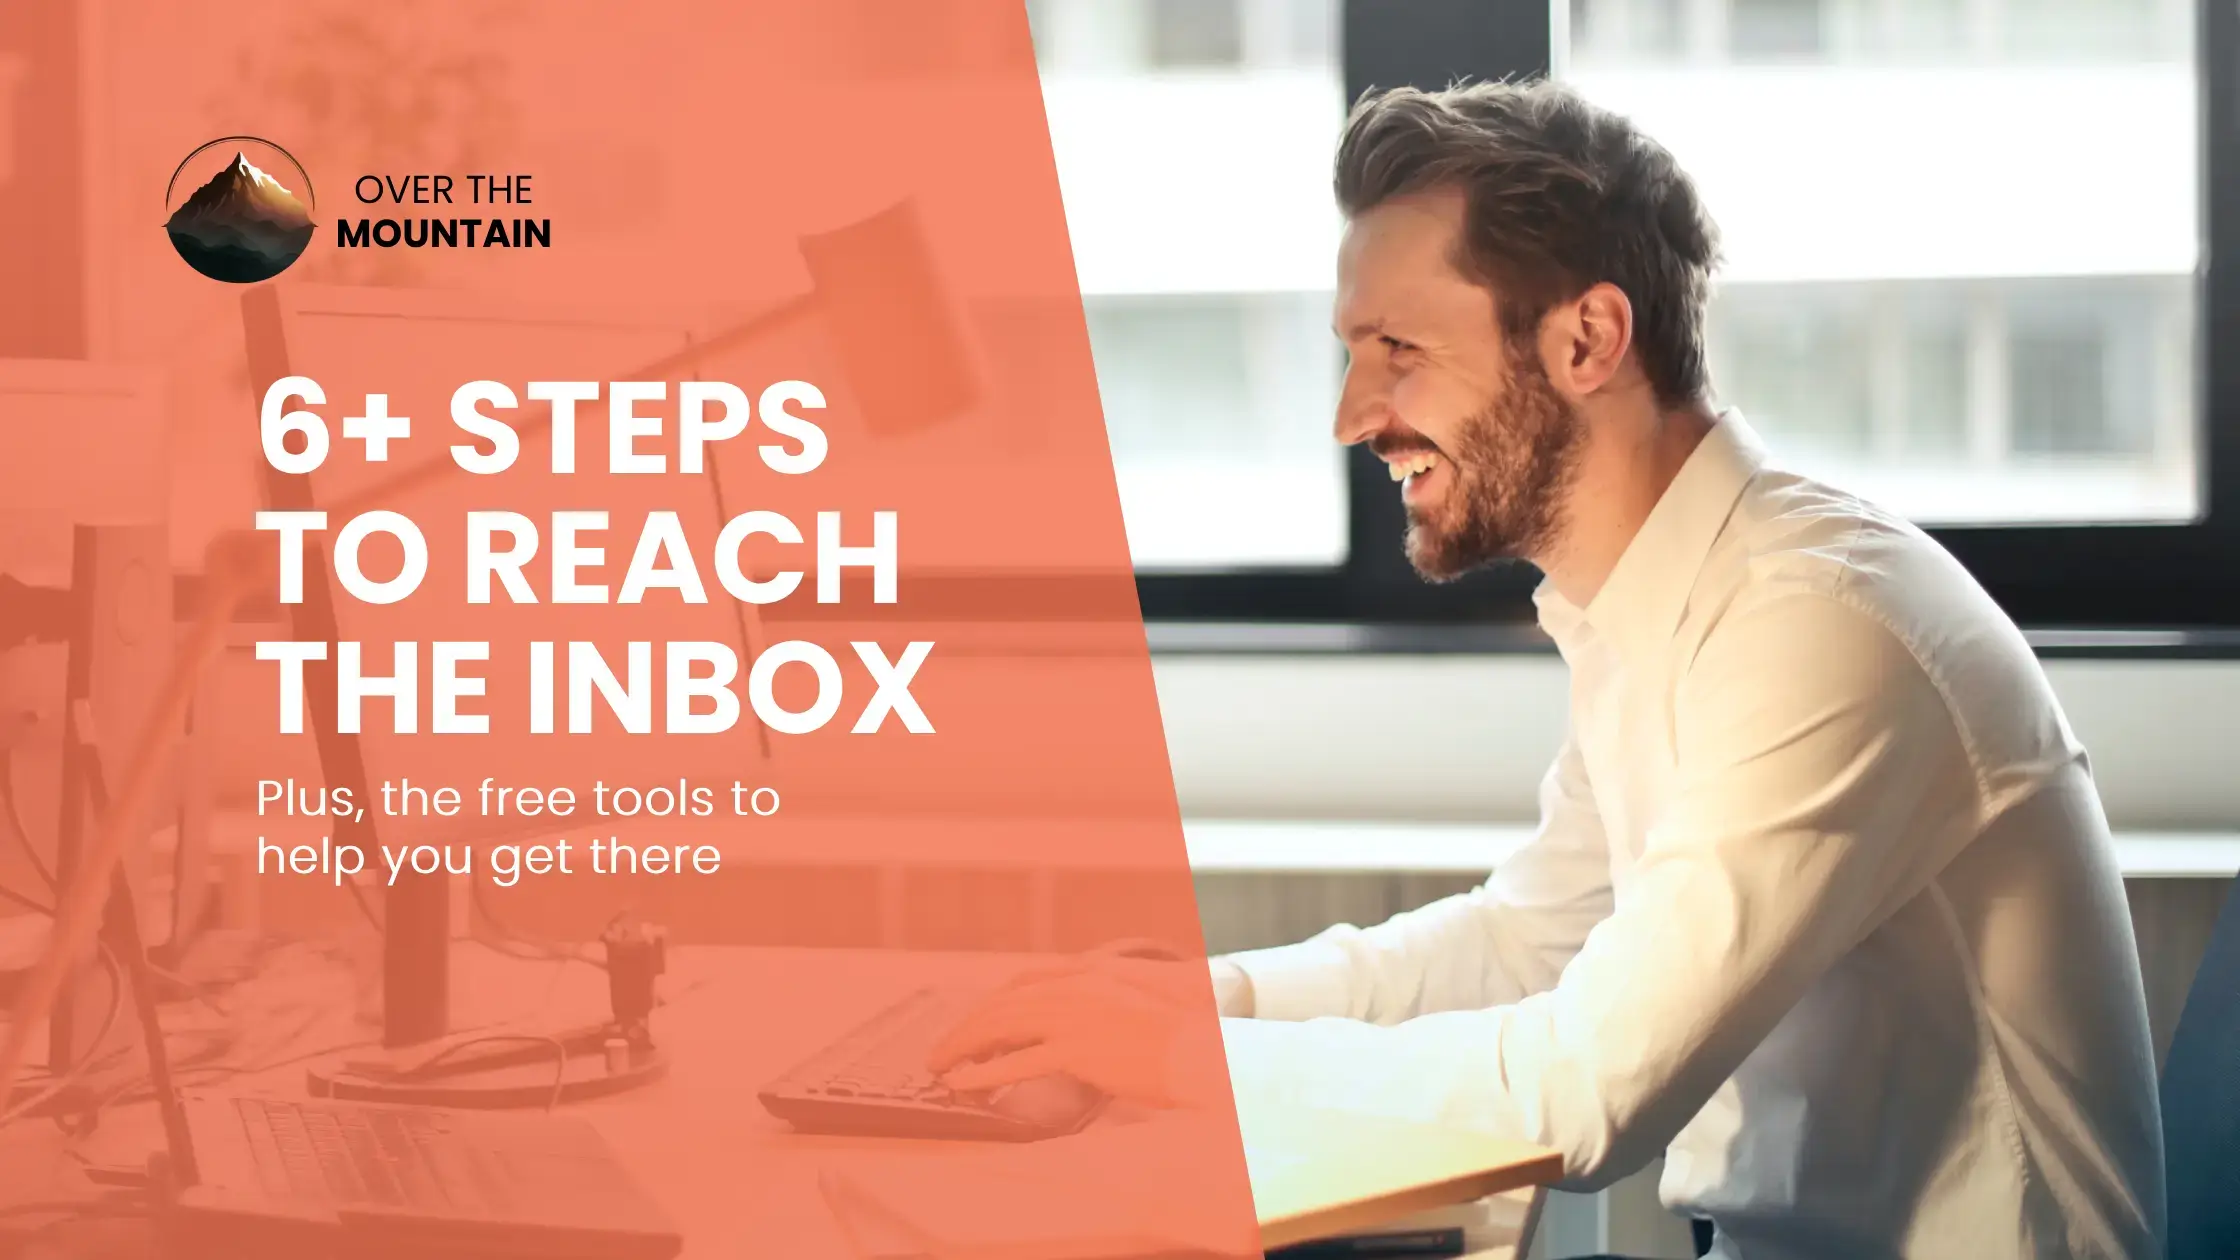 6+ Steps to Reach the Inbox (Plus, free tools to help you get there)